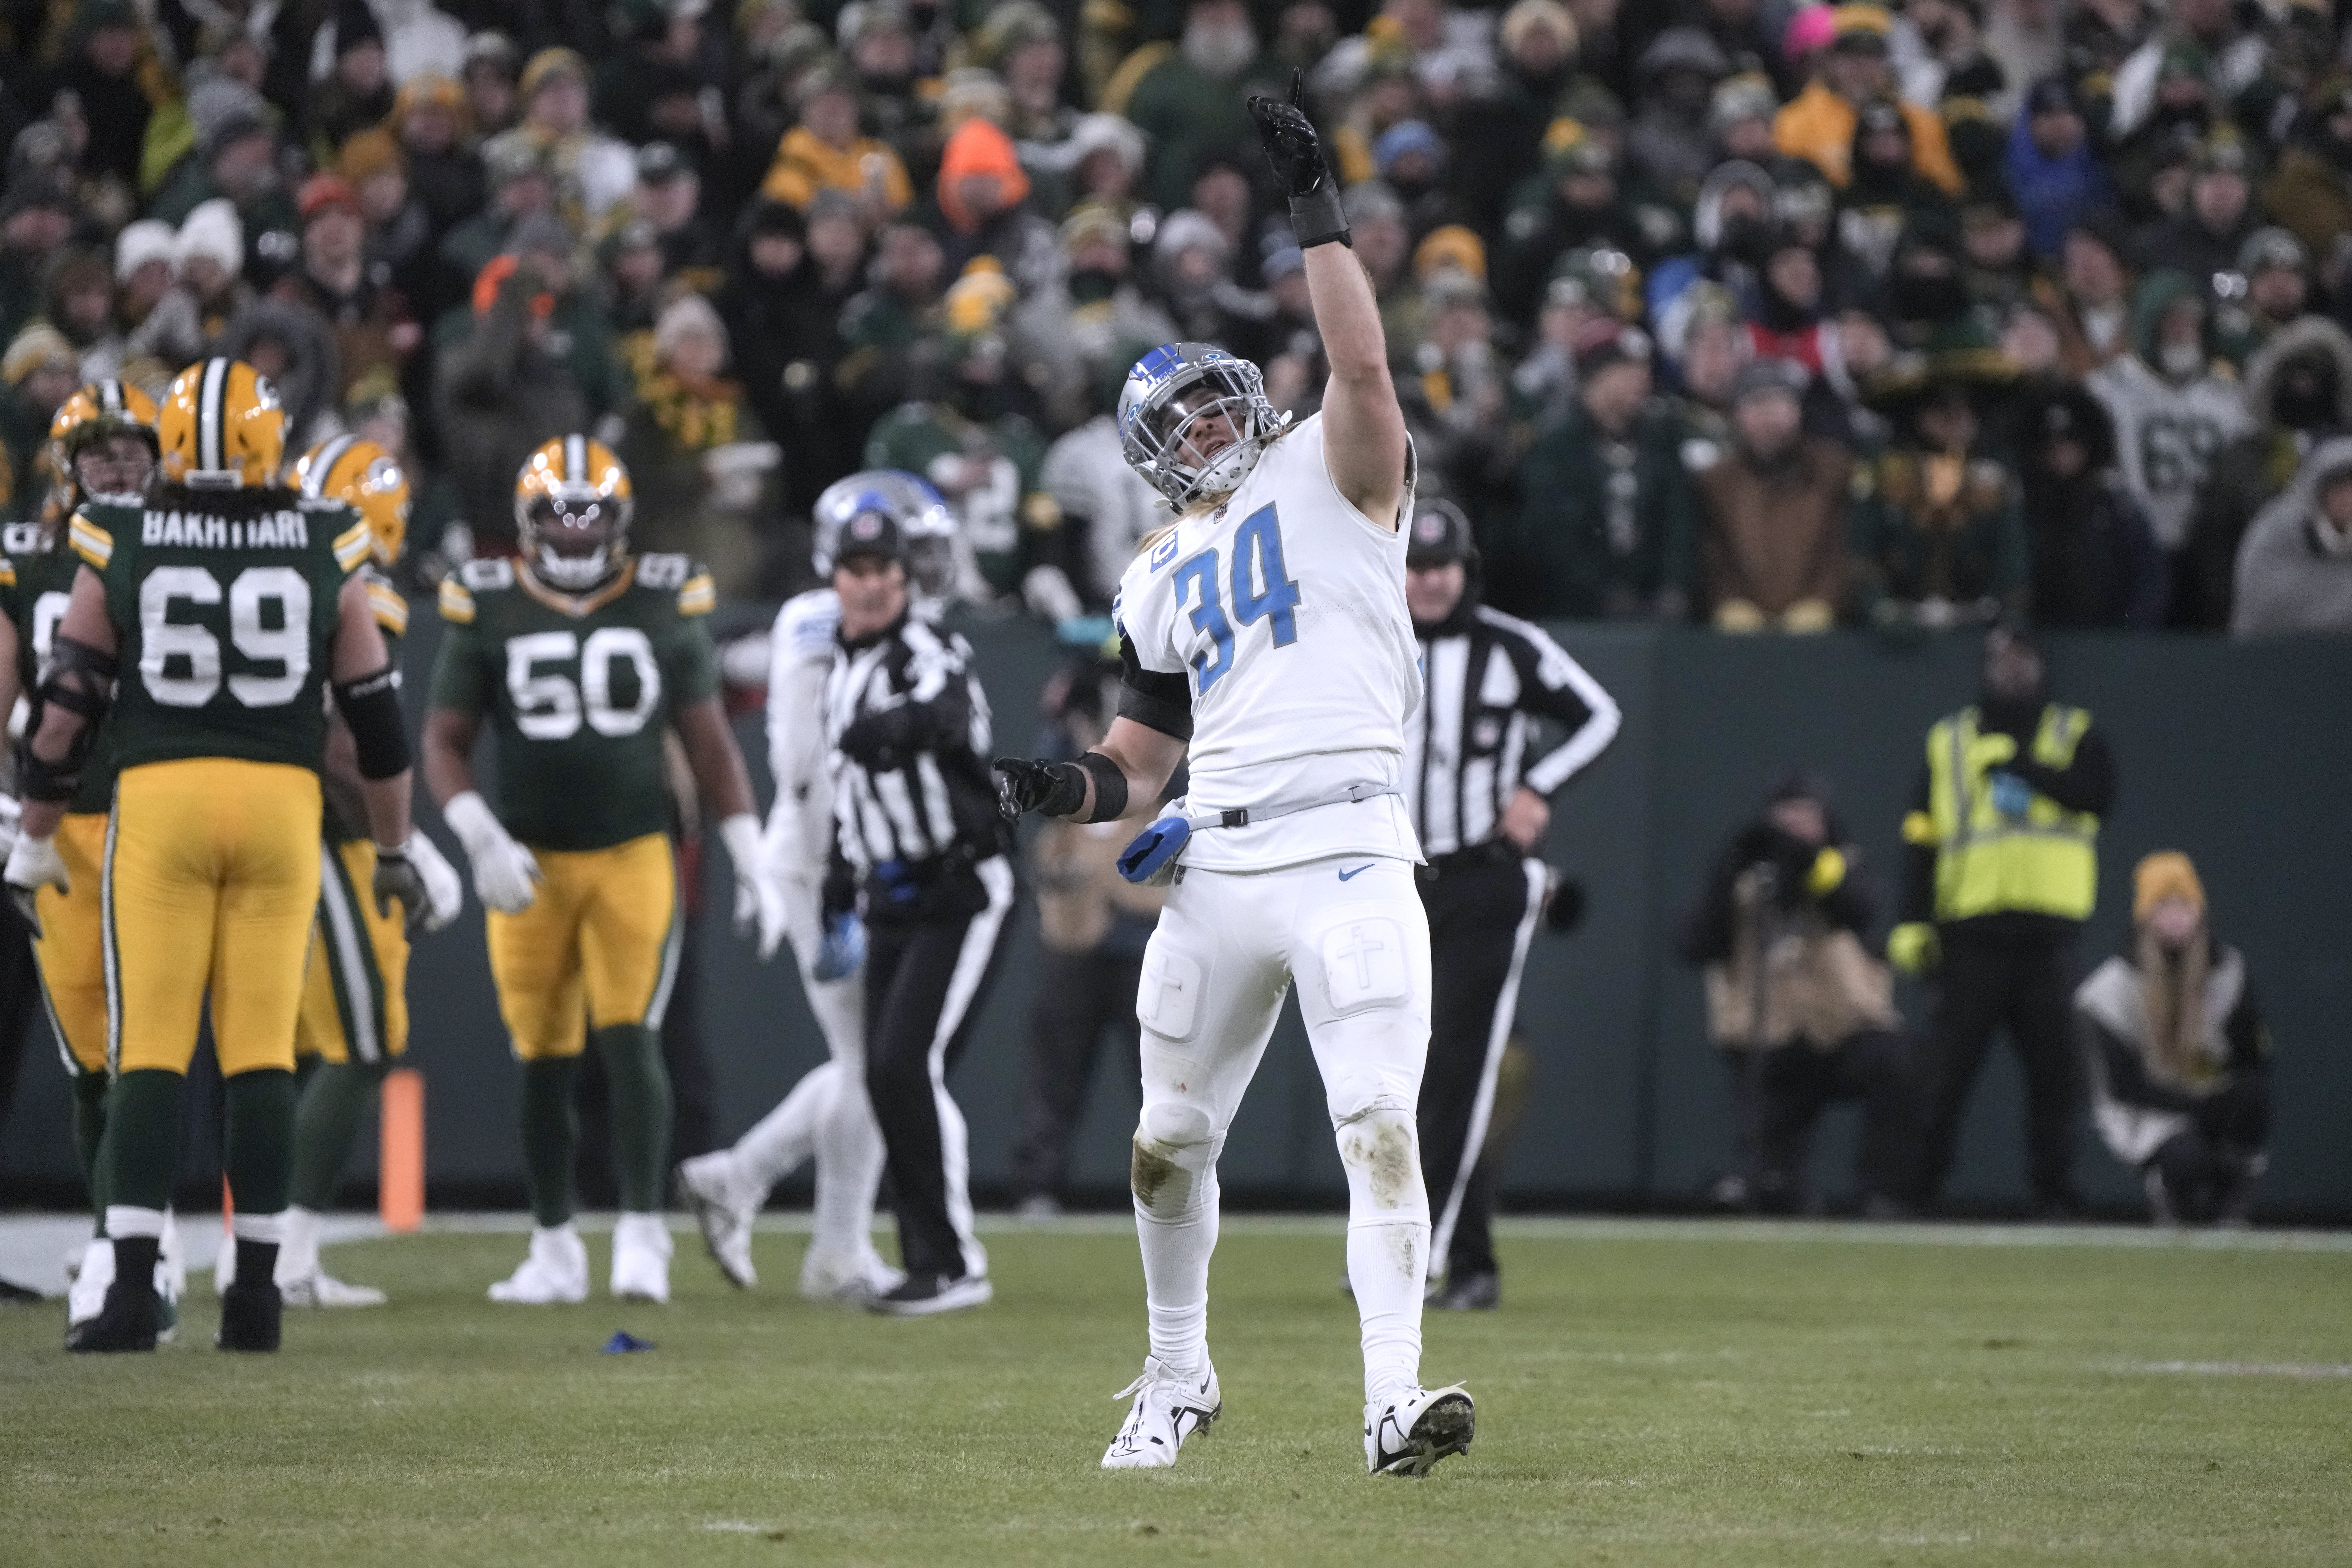 Fans react to Packers 20-16 loss to Lions, fail to make 2022 playoffs